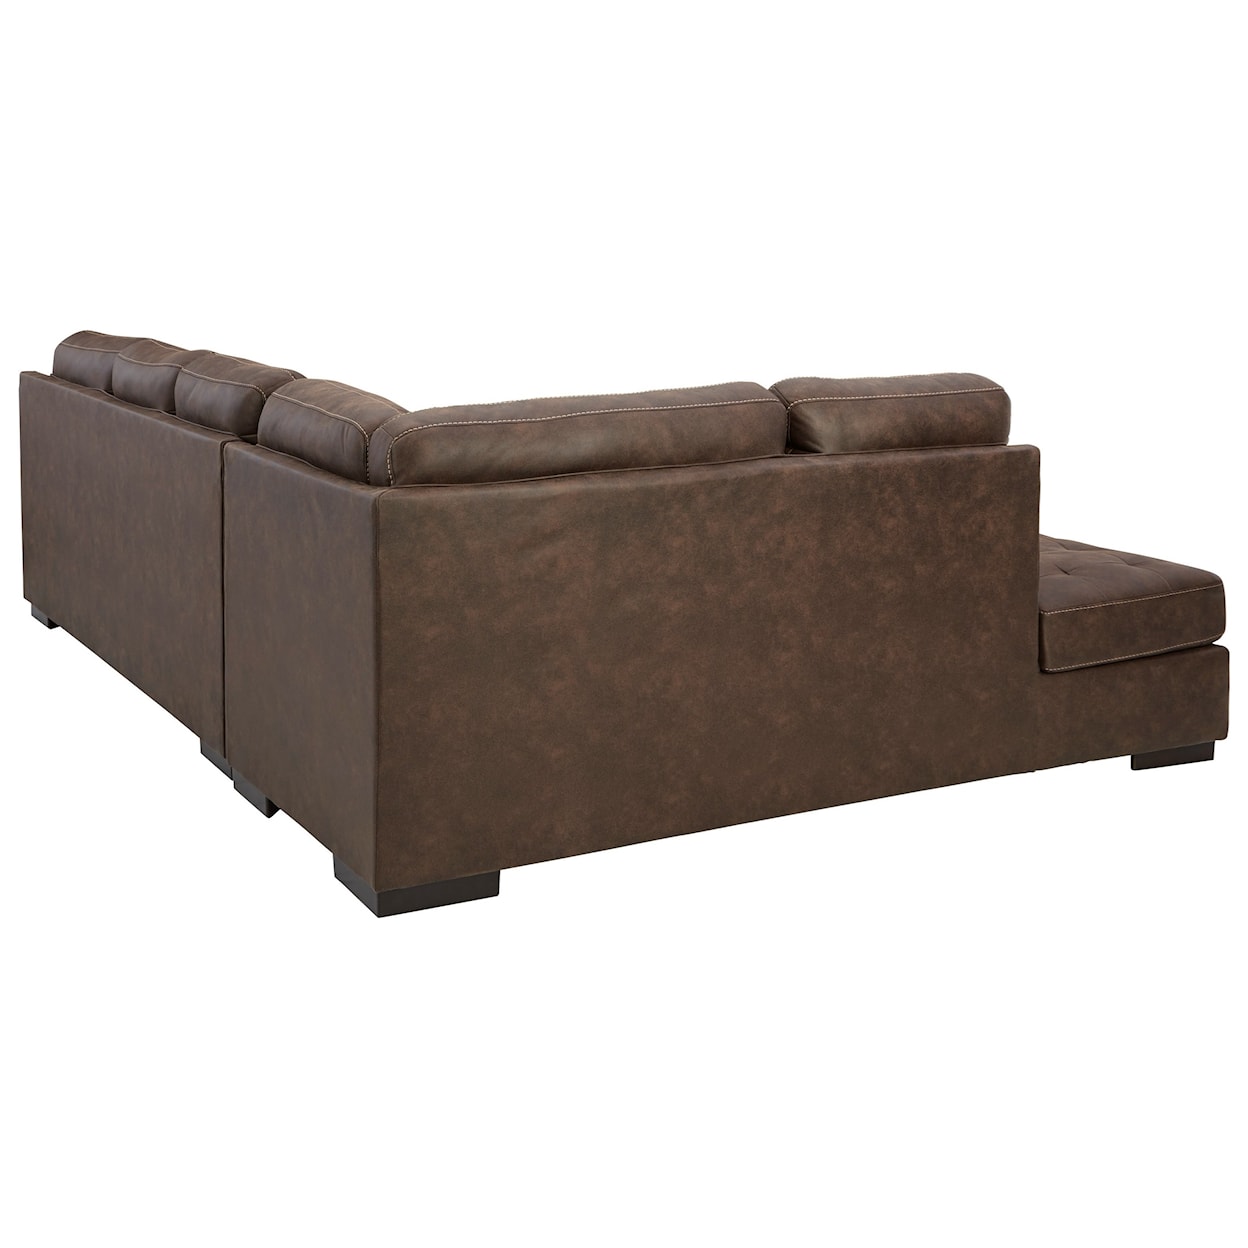 StyleLine Maderla 2-Piece Sectional with Chaise